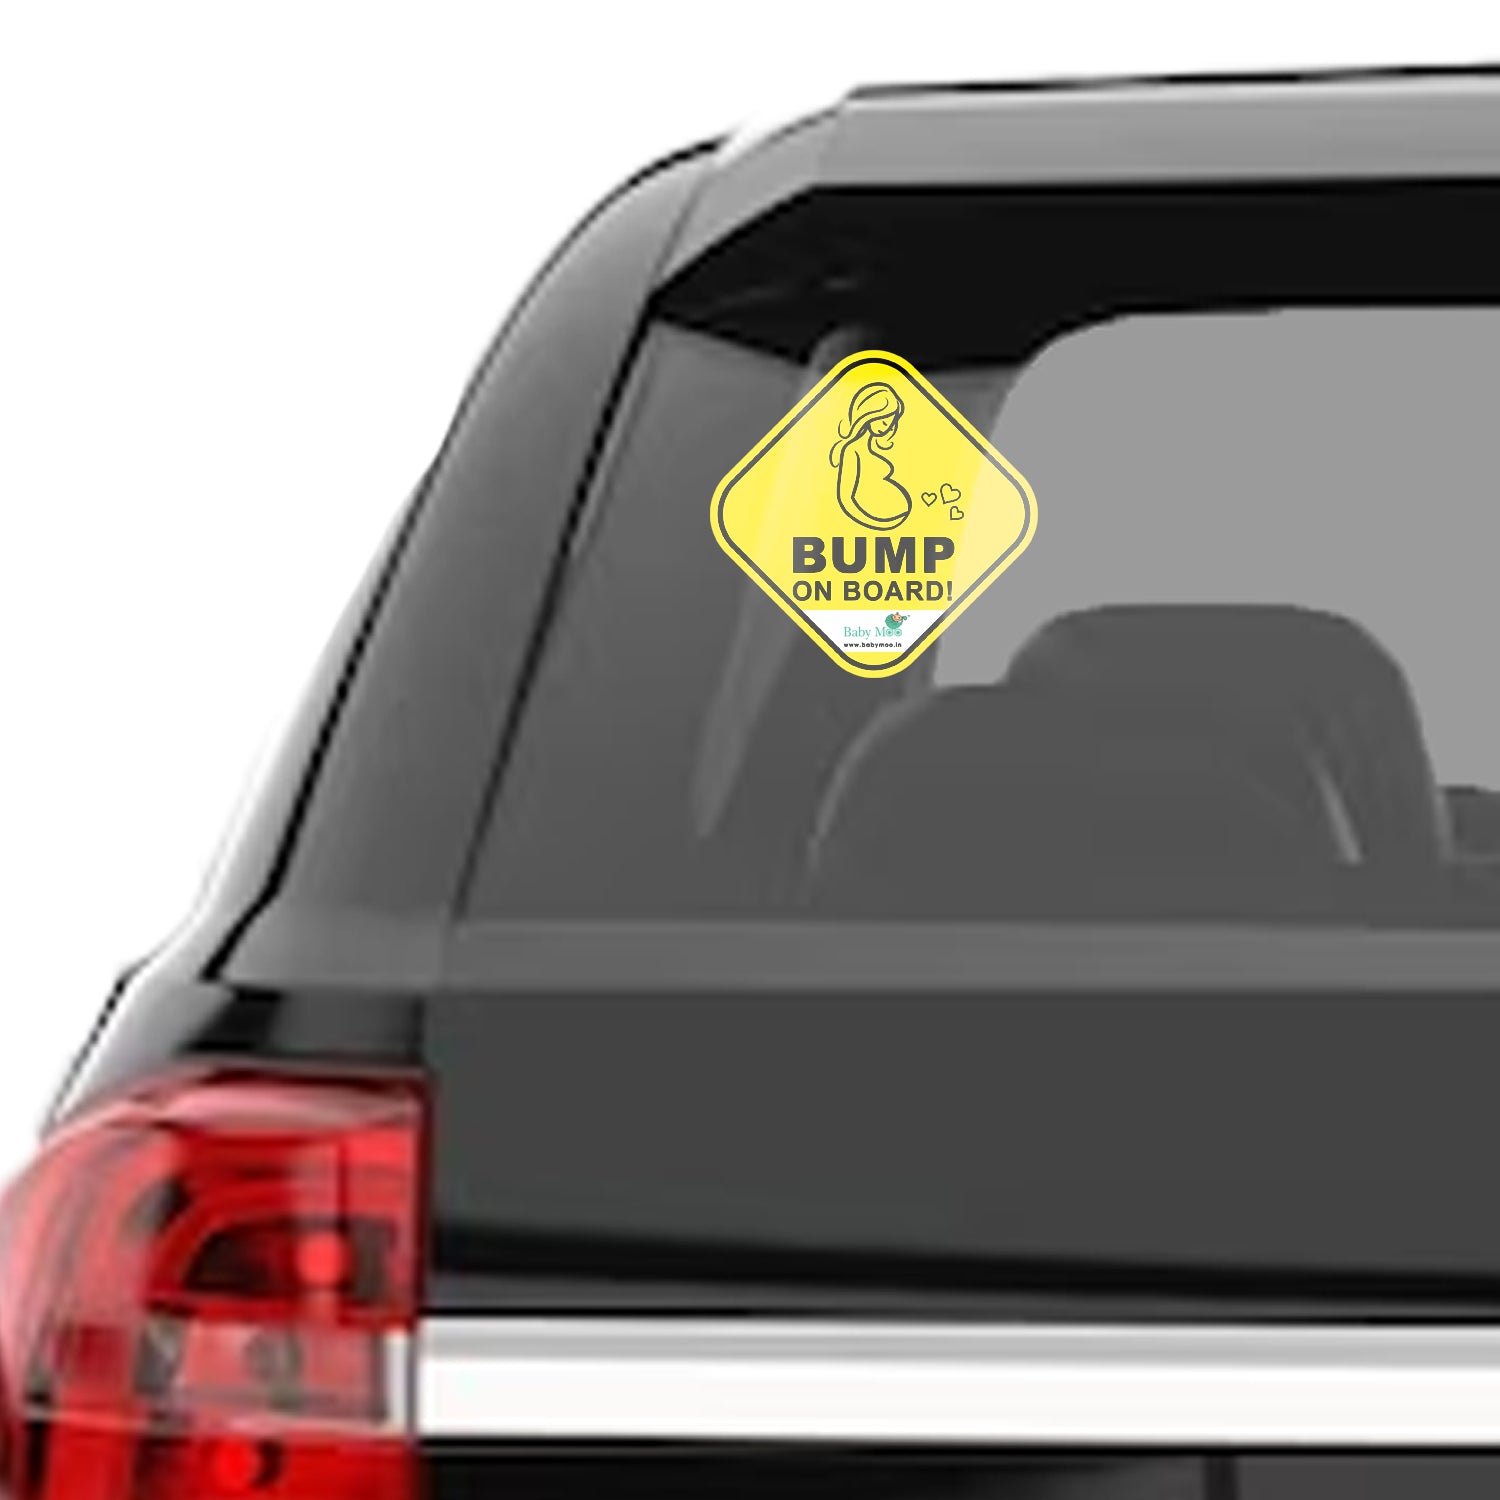 Baby Moo Mama On Board Pregnancy Safety Sign For Car With Vacuum Suction Cup Clip - Yellow